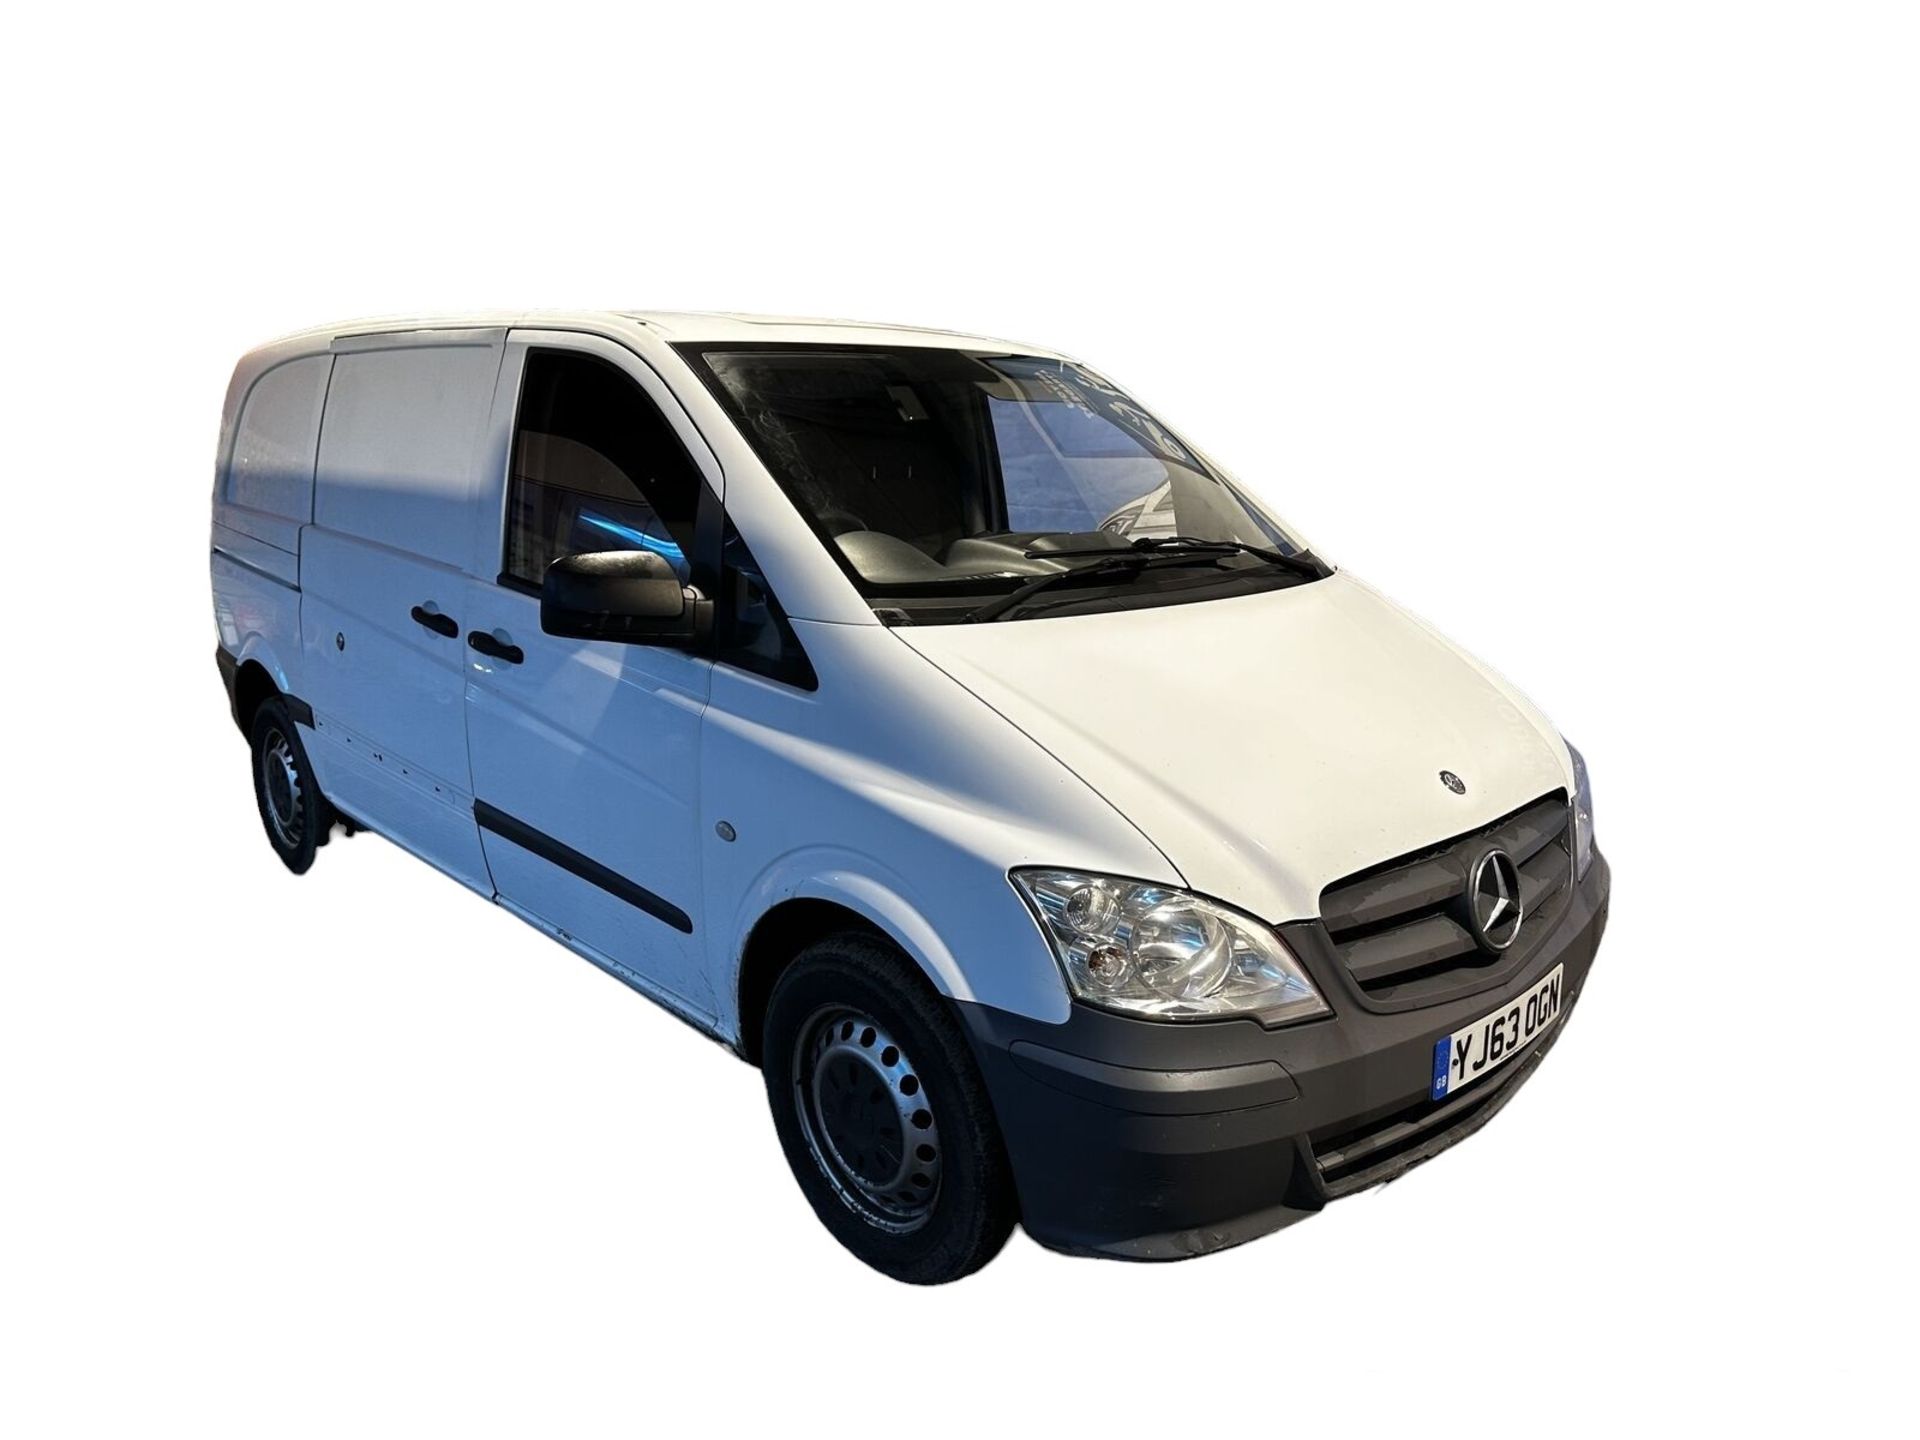 63 PLATE MERCEDES-BENZ VITO LONG DIESEL: READY FOR ACTION >>--NO VAT ON HAMMER--<< - Image 2 of 12